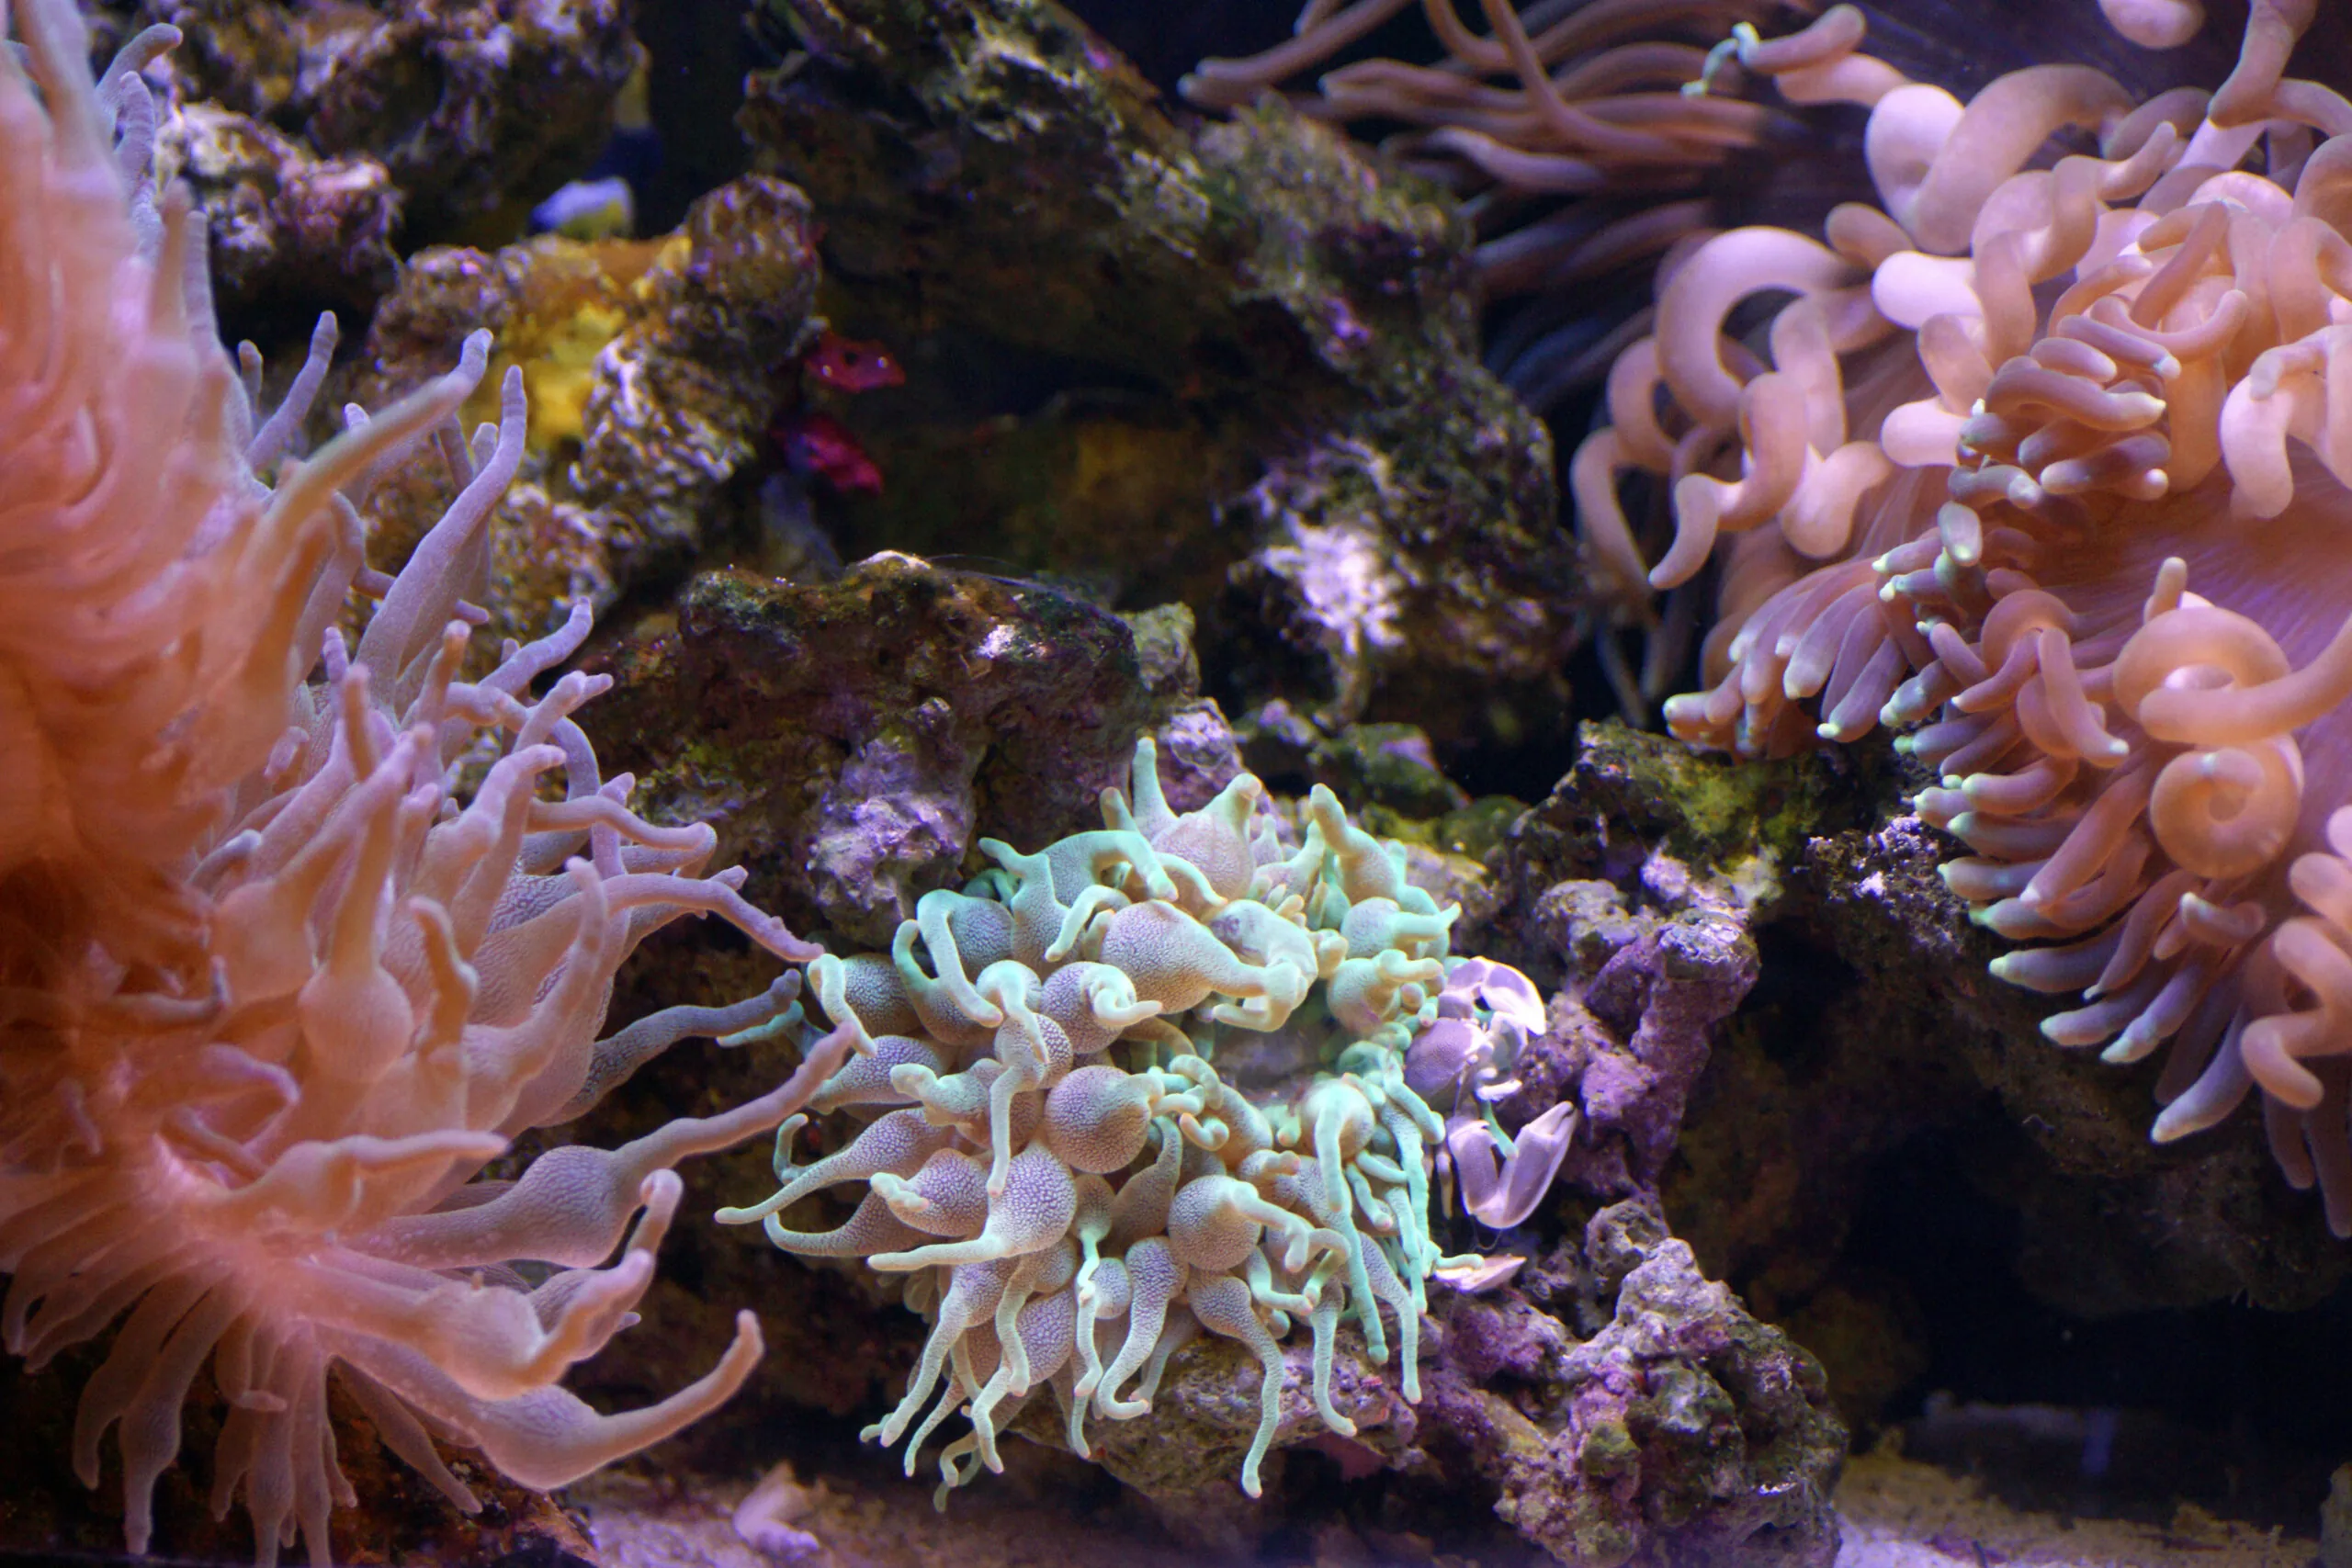 Anemones on a reef